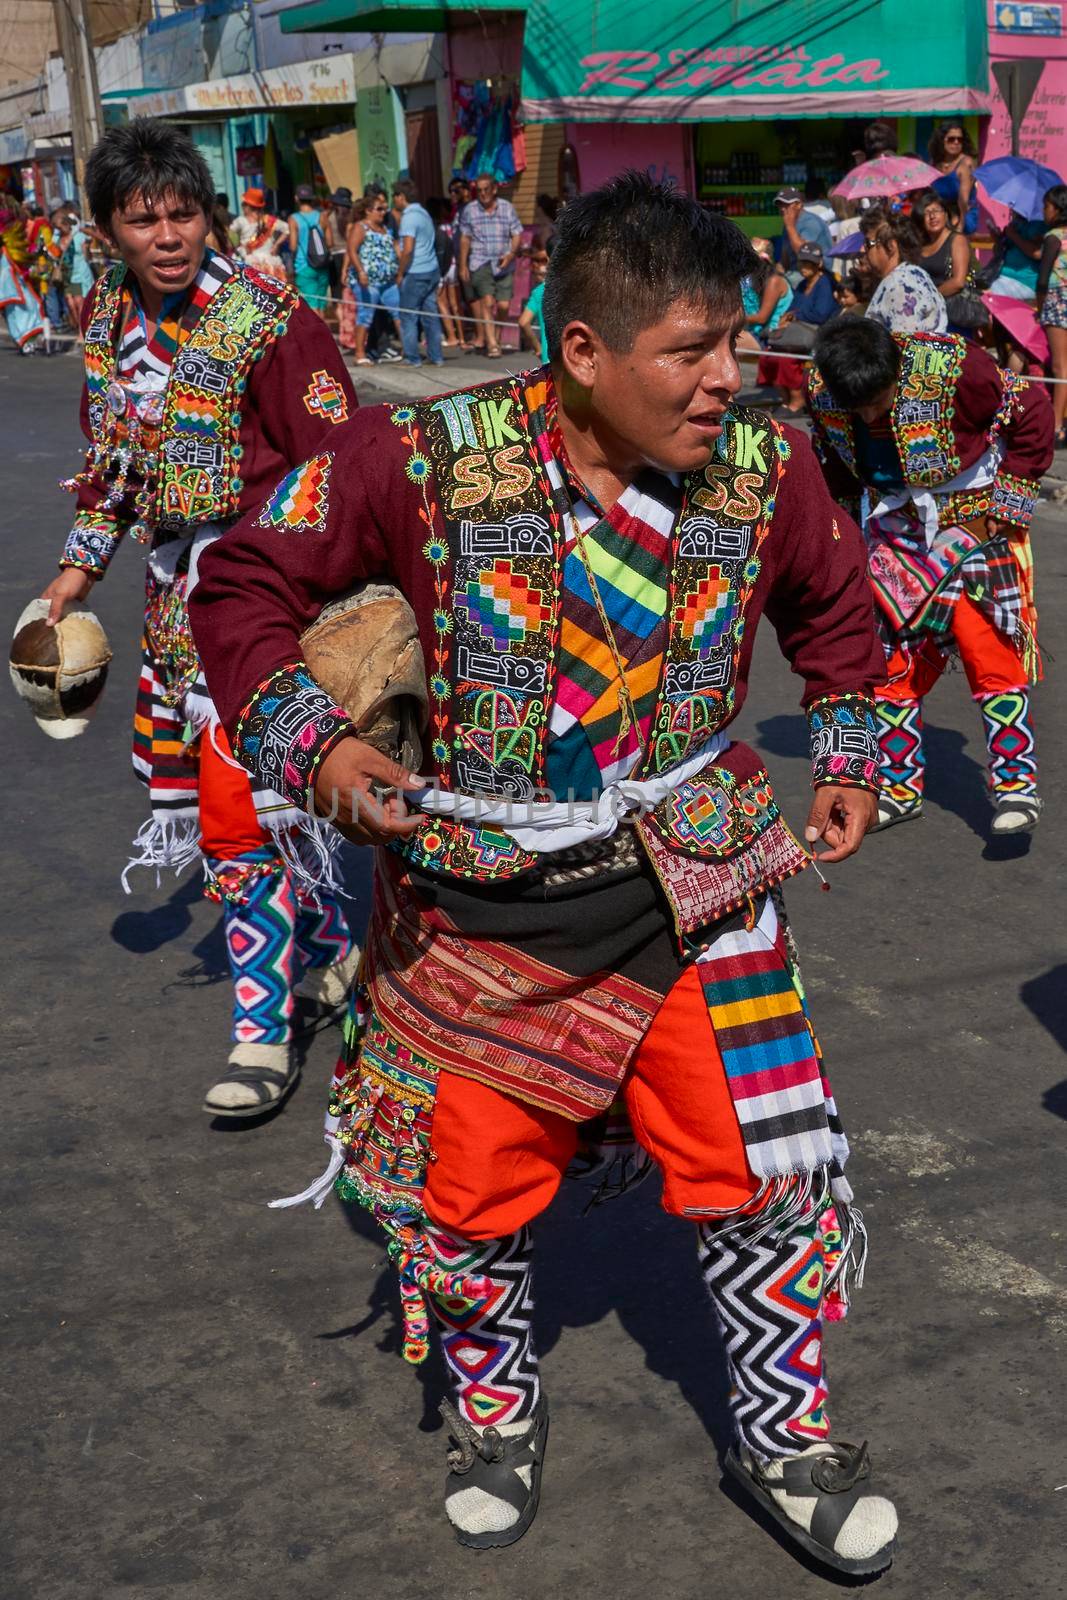 ARICA, CHILE - JANUARY 22, 2016: Tinkus dancing group in colourful costumes performing a traditional ritual dance as part of the Carnaval Andino con la Fuerza del Sol in Arica, Chile.